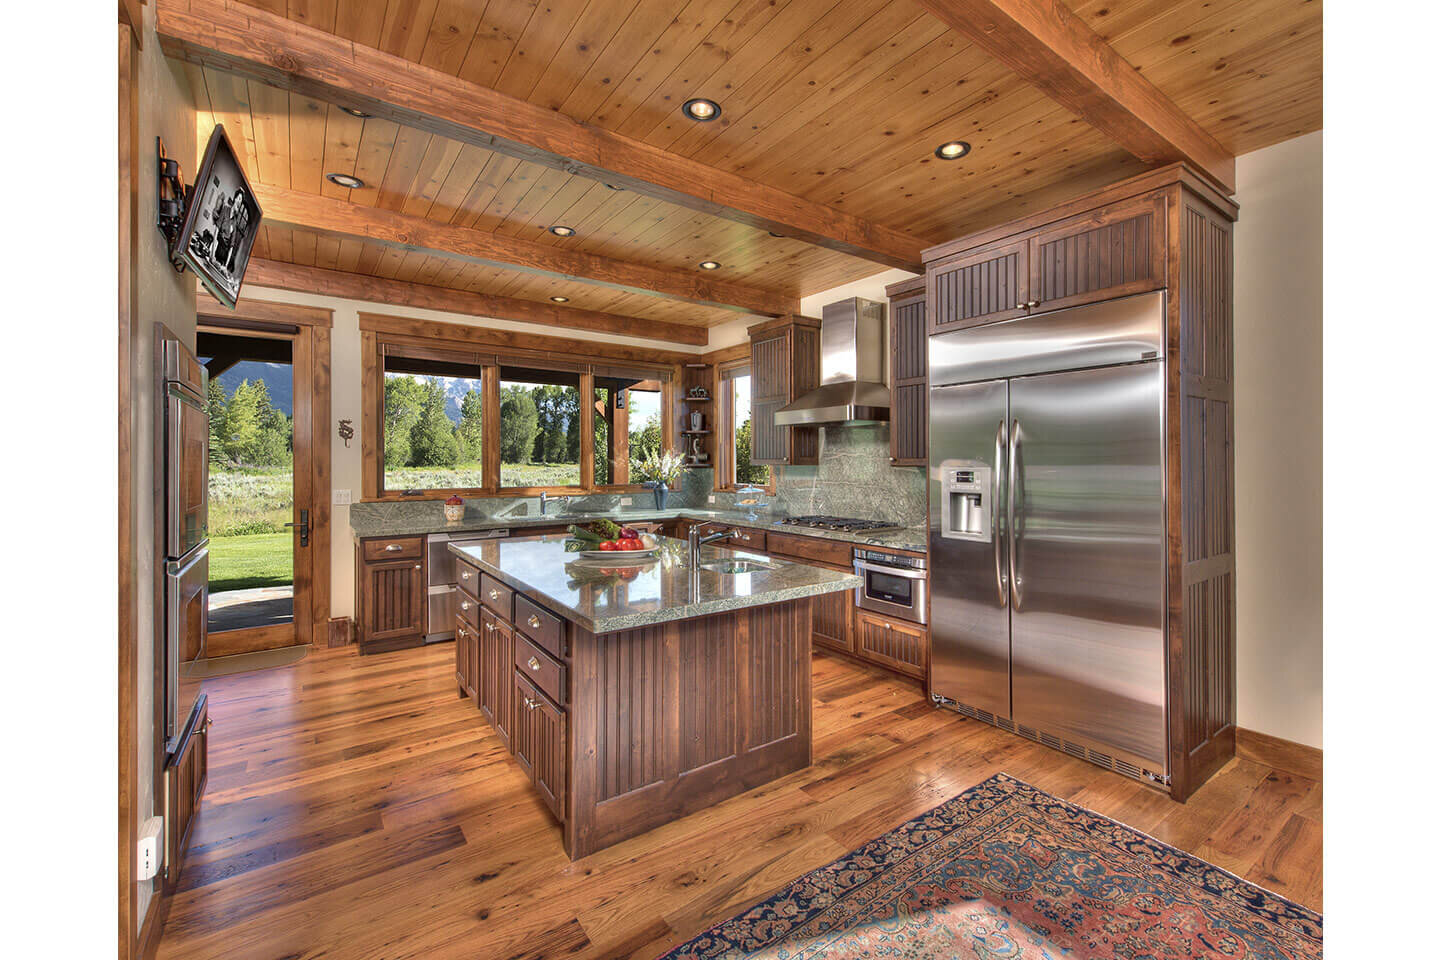 Spacious kitchen with wooden floor and ceiling
